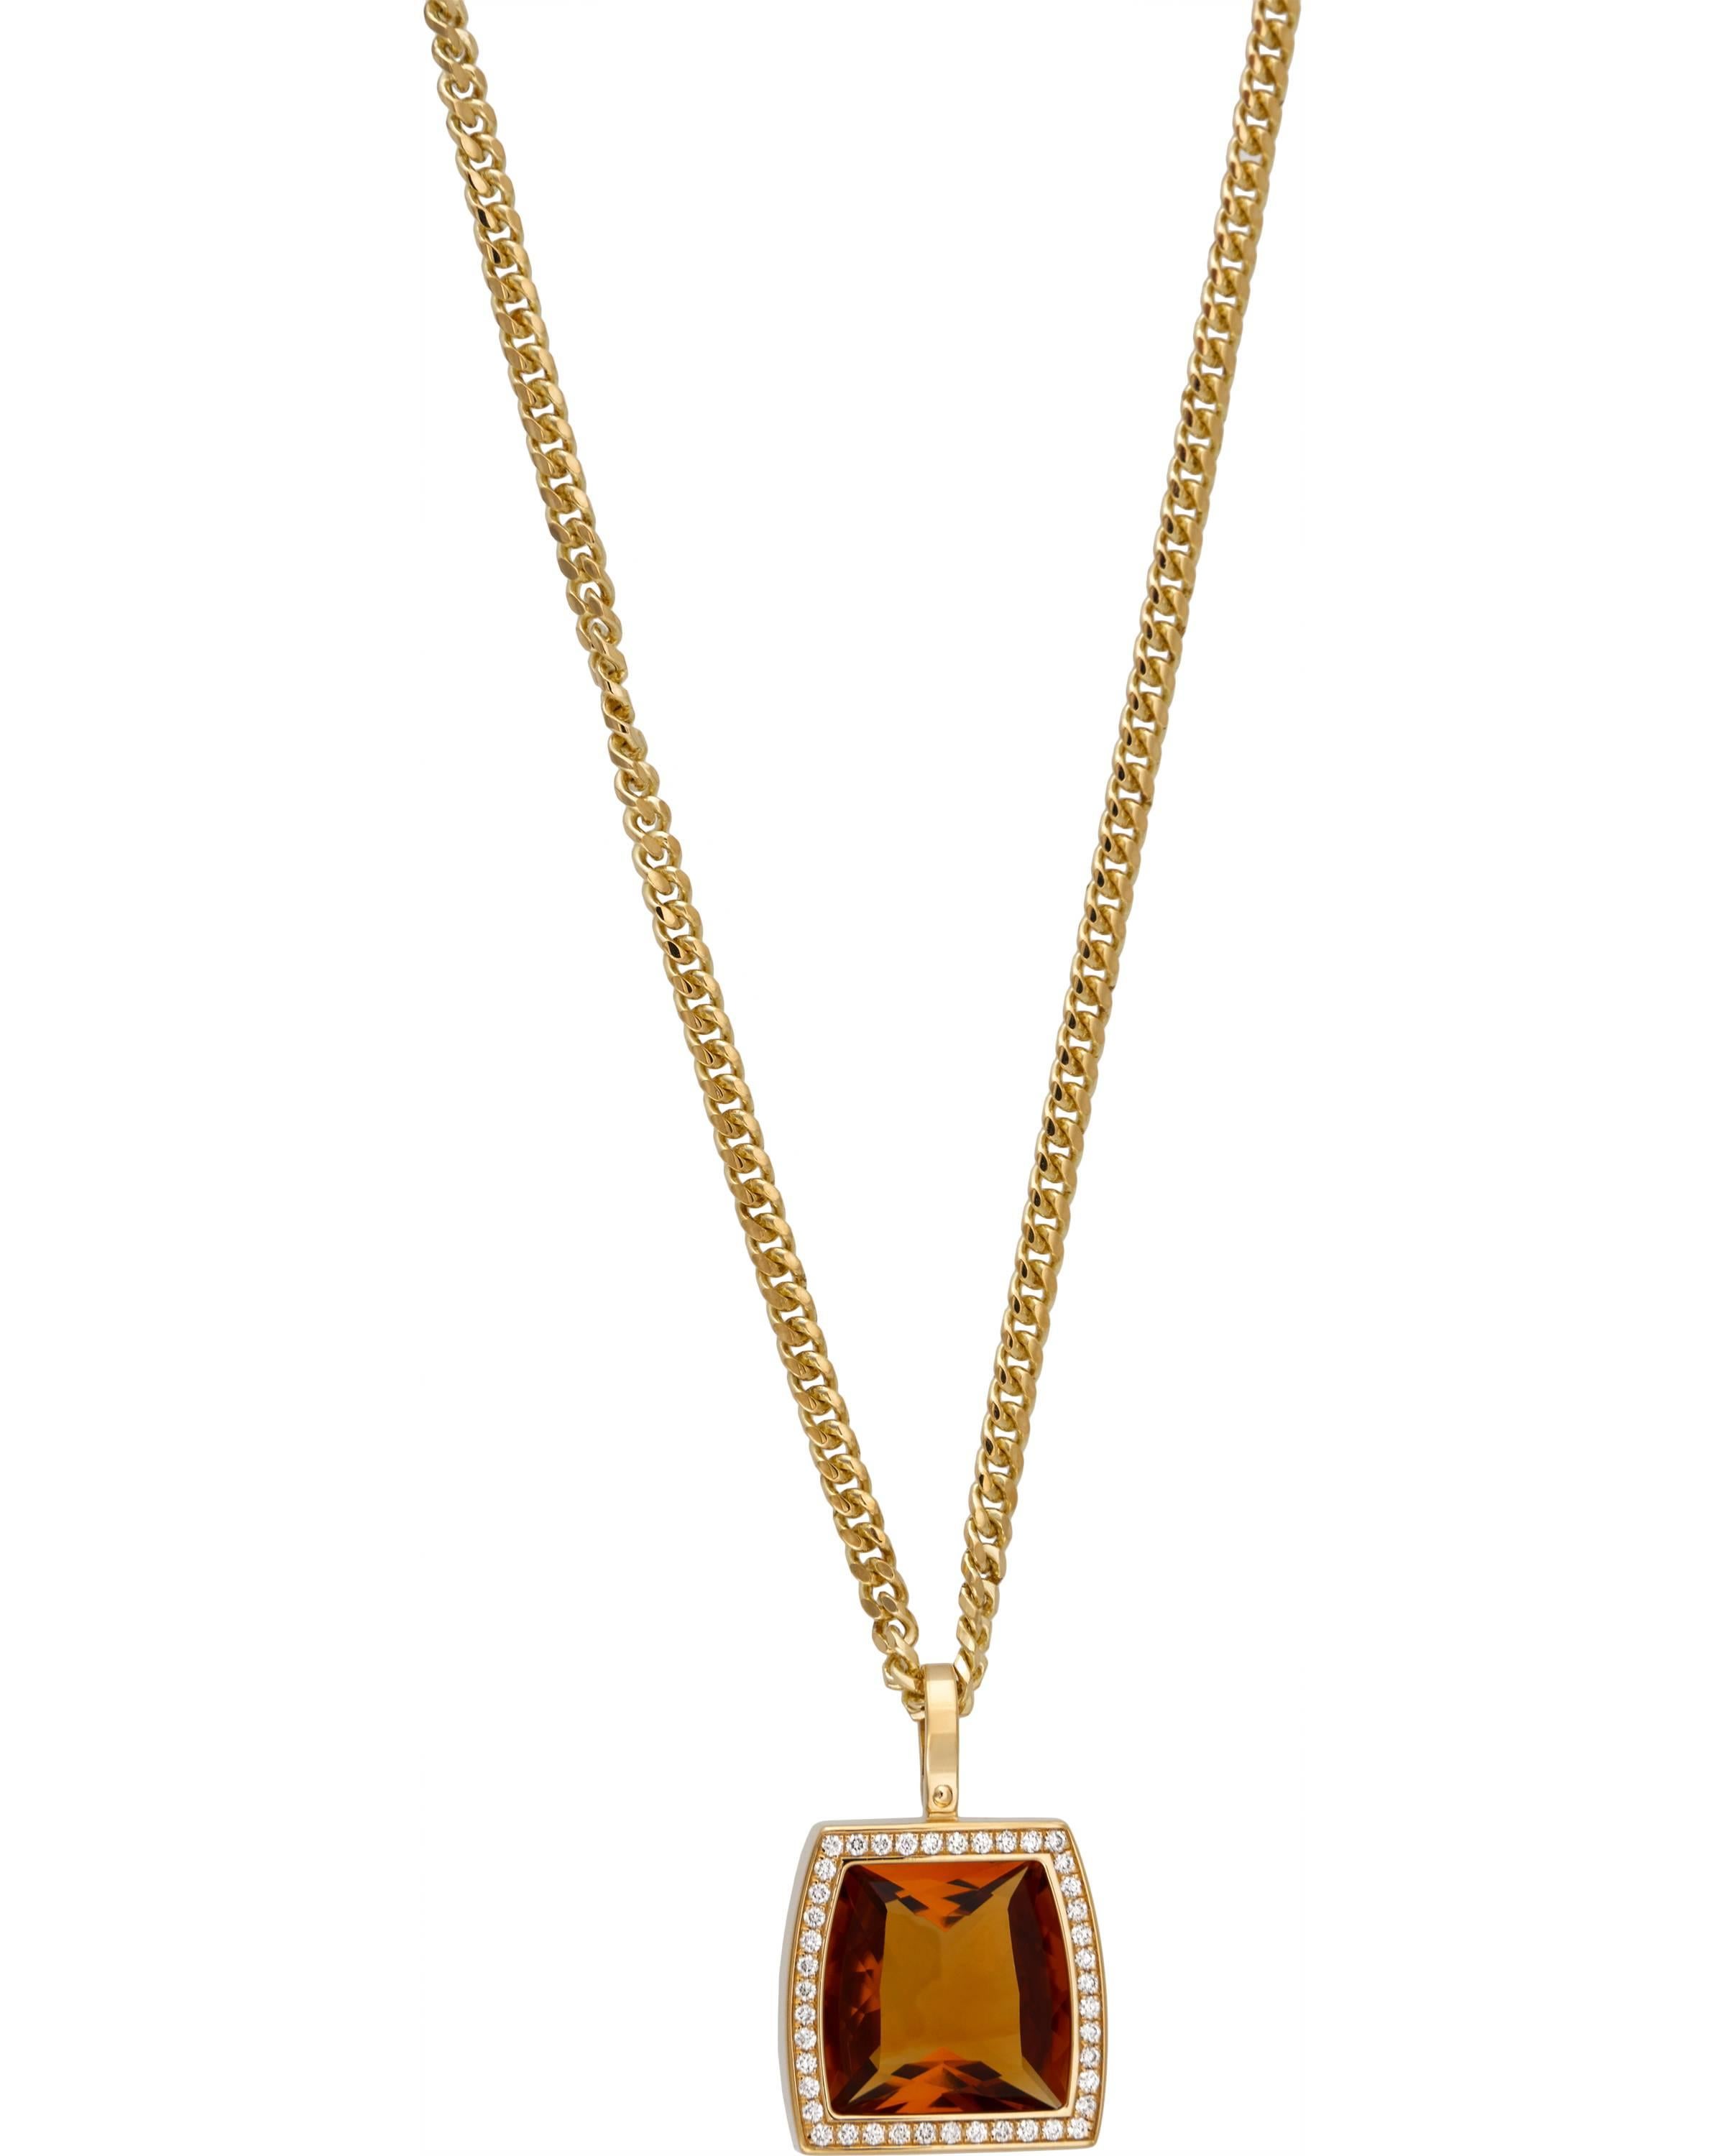 The stunning tone and hue of the citrine in this necklace show just how versatile and compelling this crystal can be. An amazingly crafted piece of jewelry that is uniquely captivating.

18K Yellow Gold
Diamond: 0.30 ct twd
Total Weight: 14.8